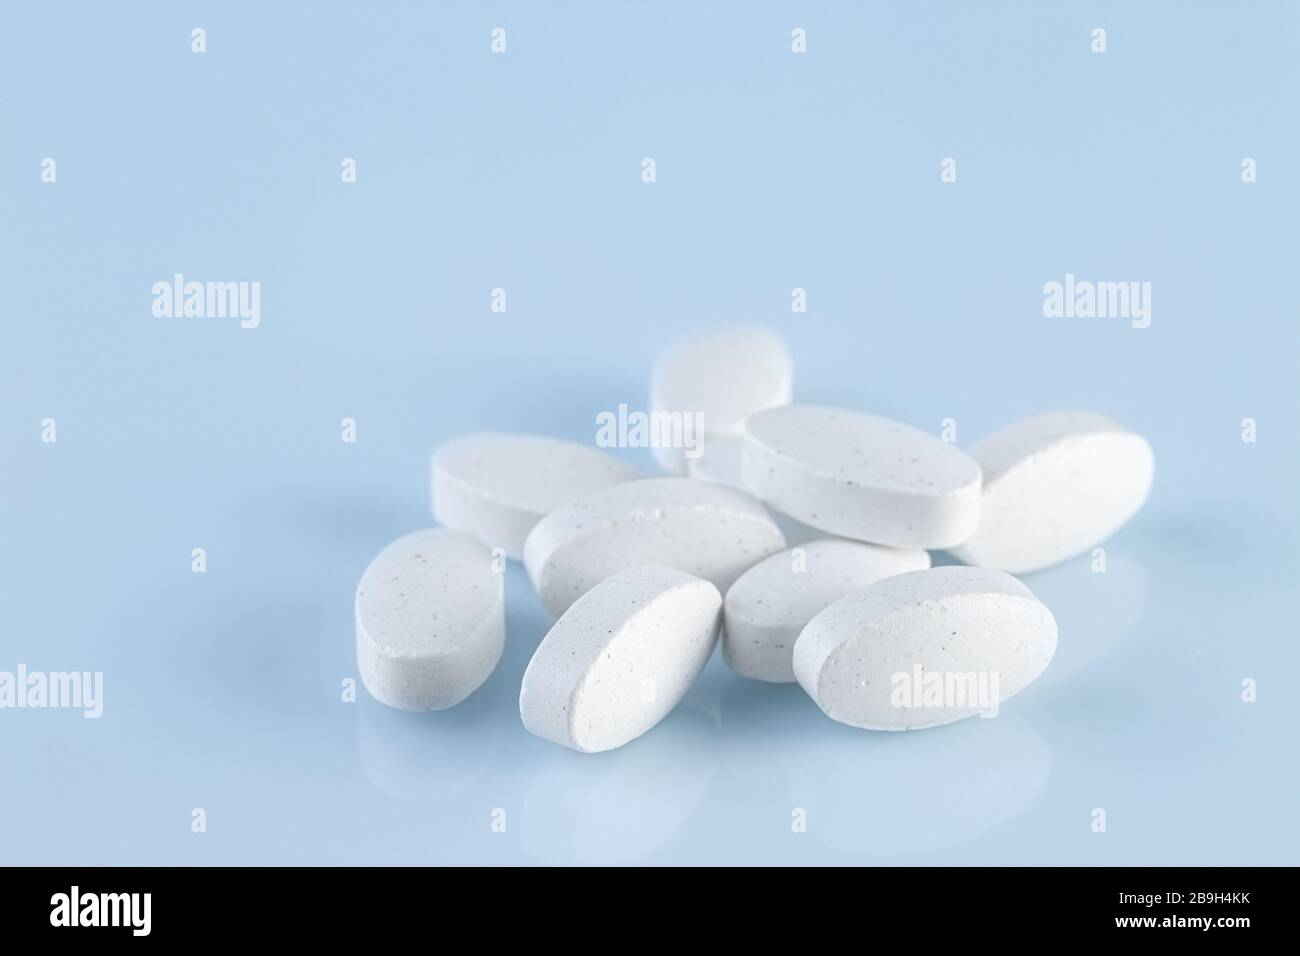 Heap of white medical pills on a light blue background. Pharmaceutical medicament, cure for health. Medicine concept. Stock Photo